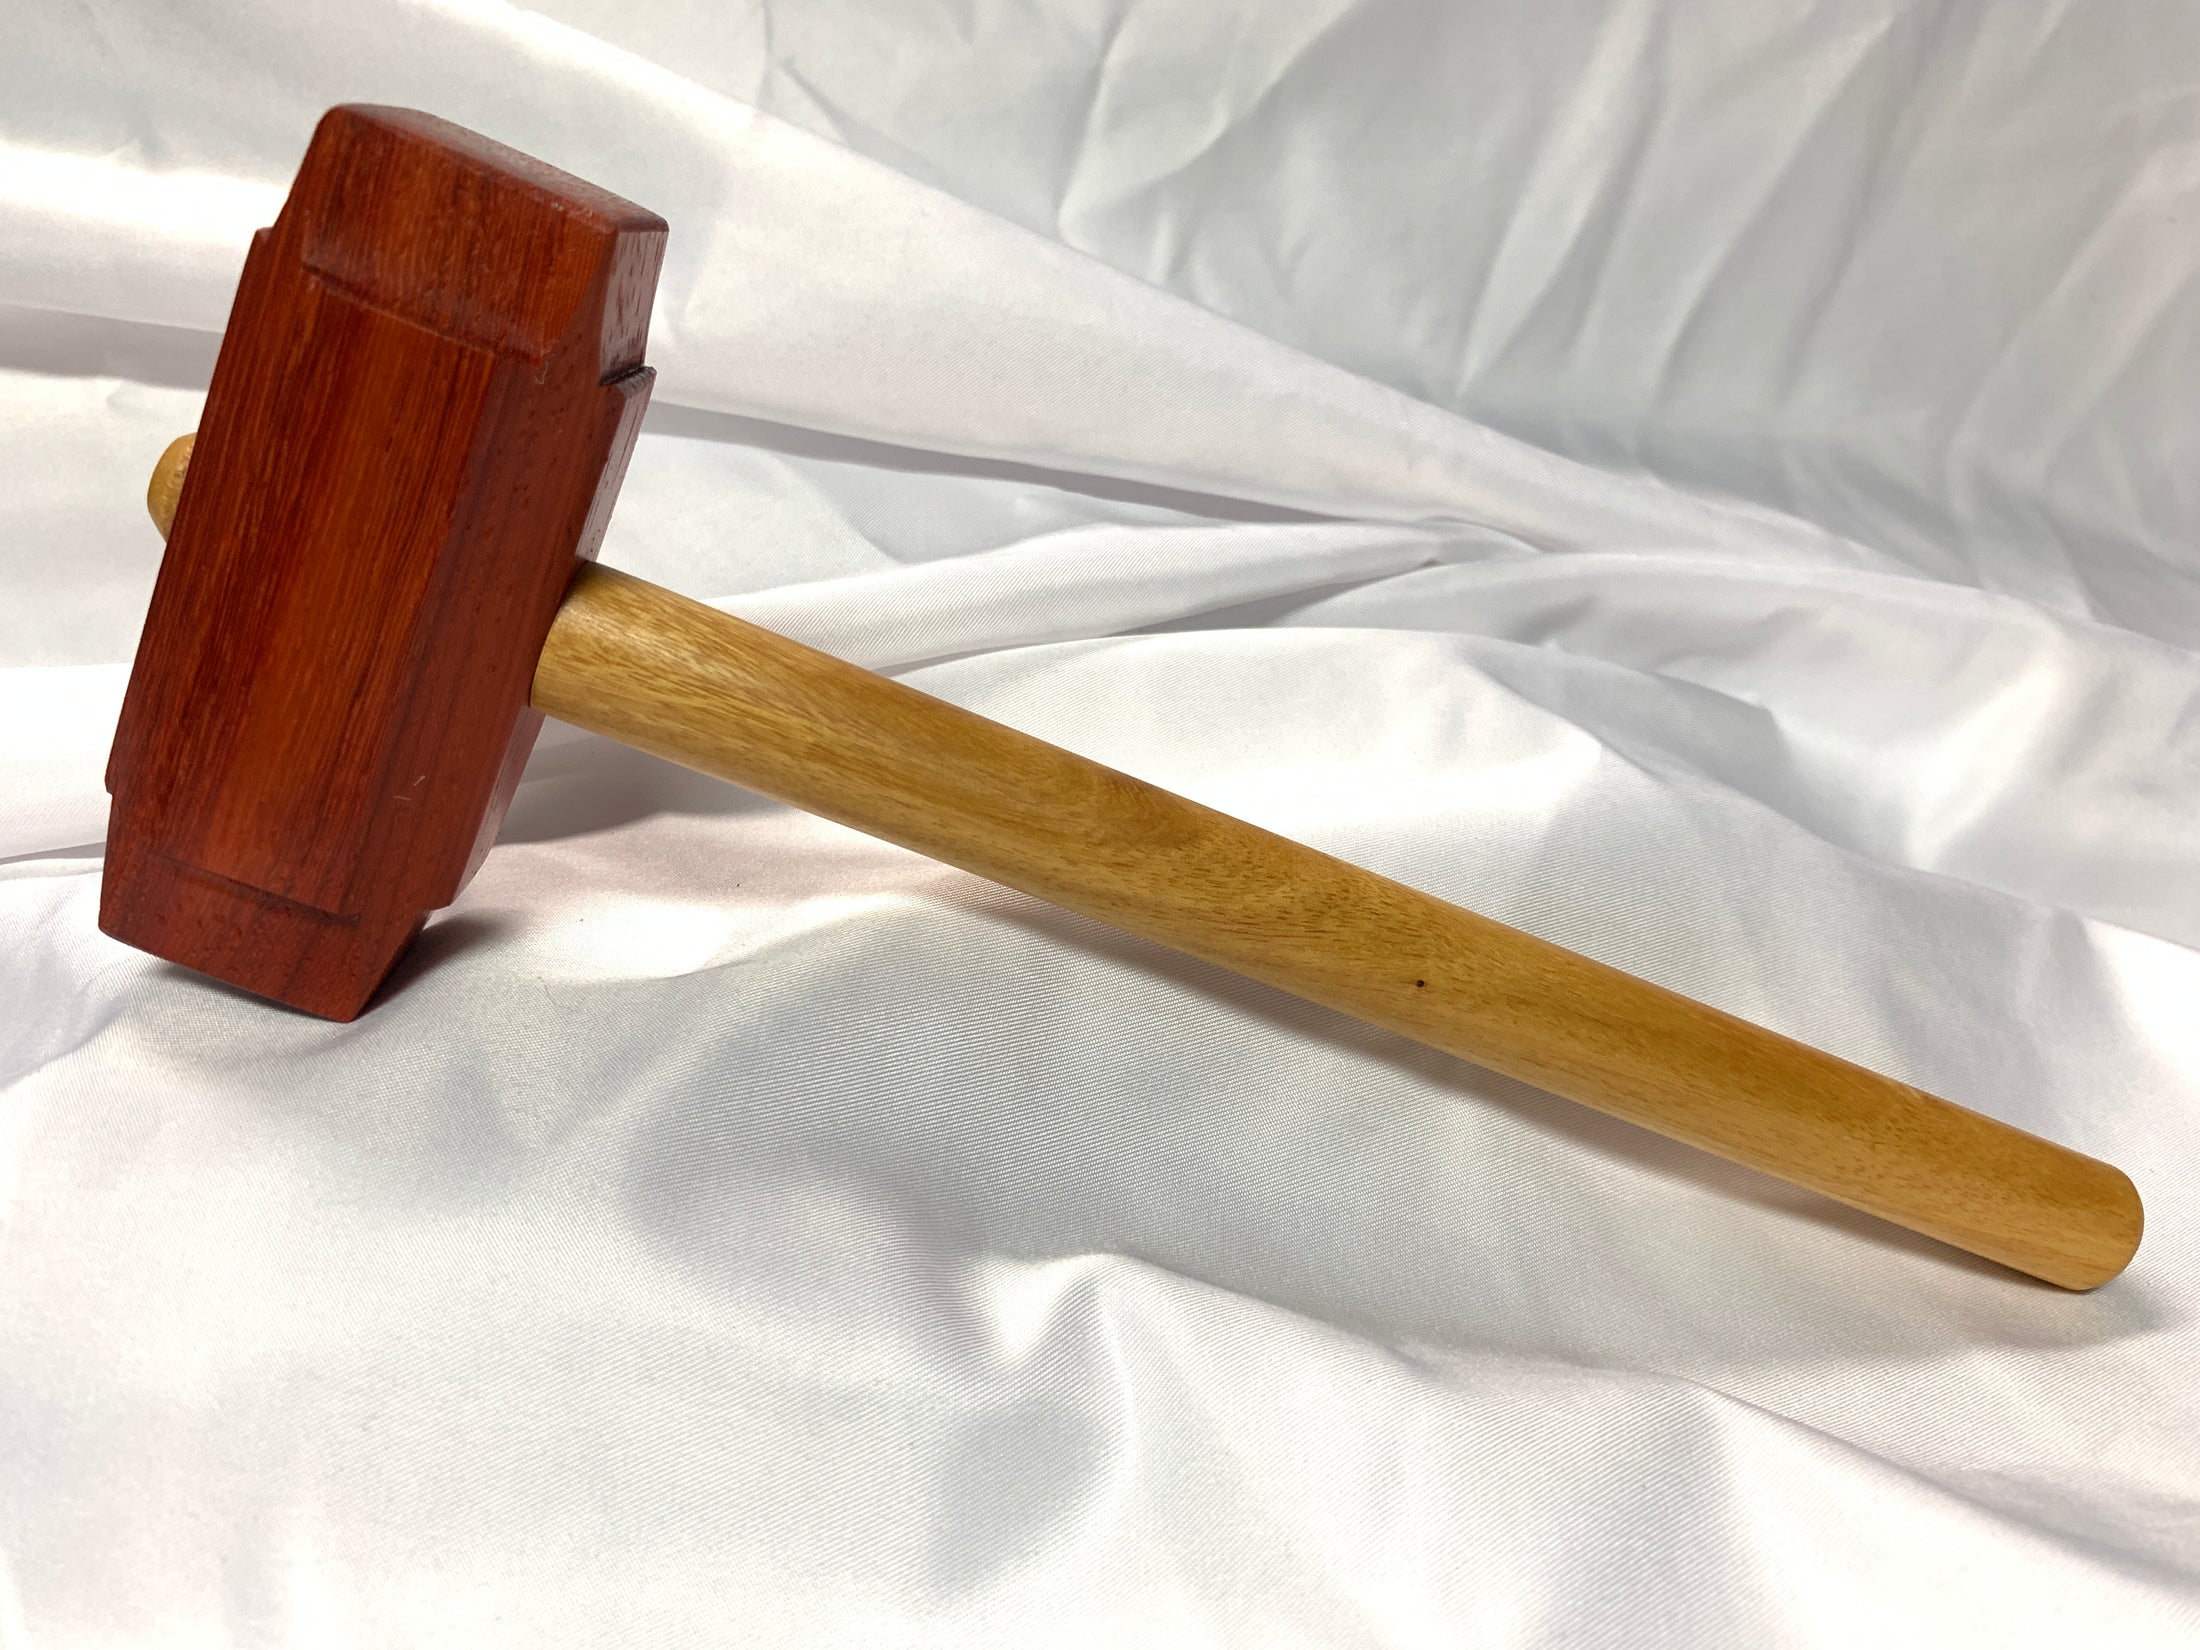 Thors Hammer Woodworking Mallet Padauk Head with Osage Orange Handle Kings Fine Woodworking